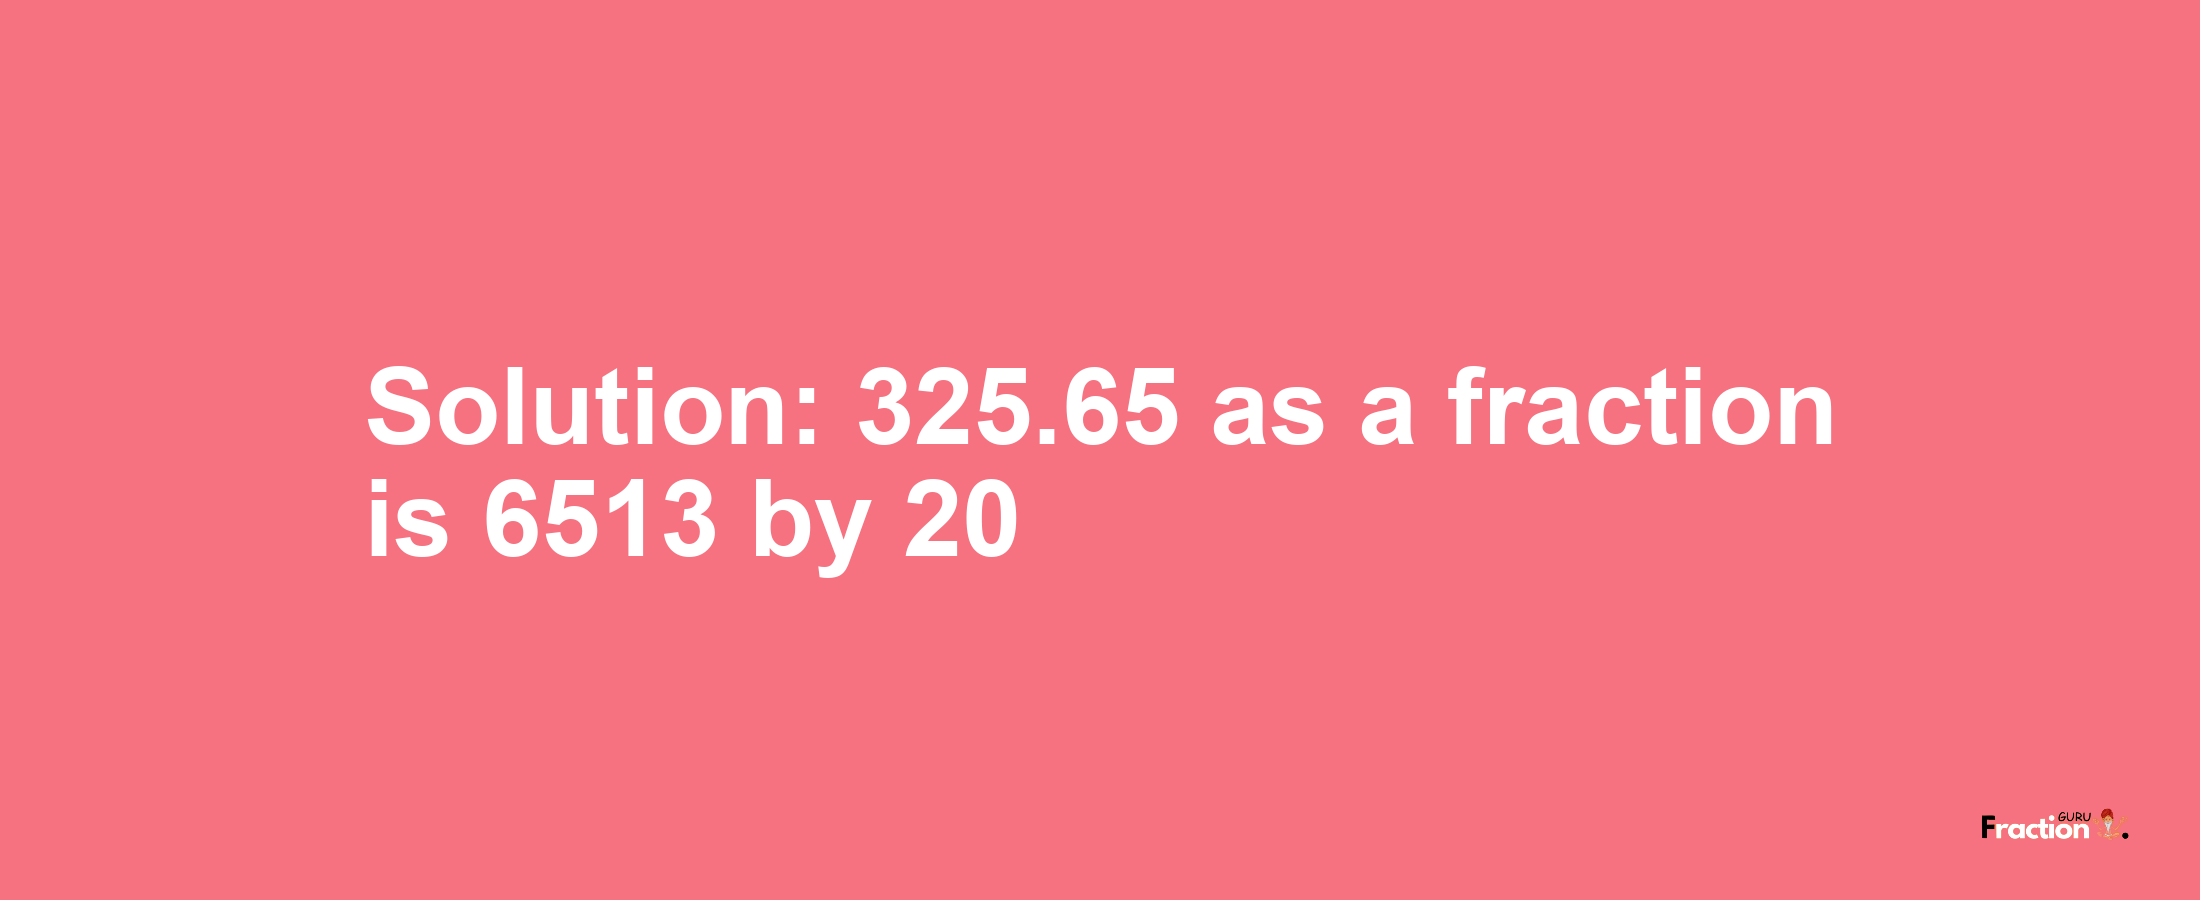 Solution:325.65 as a fraction is 6513/20